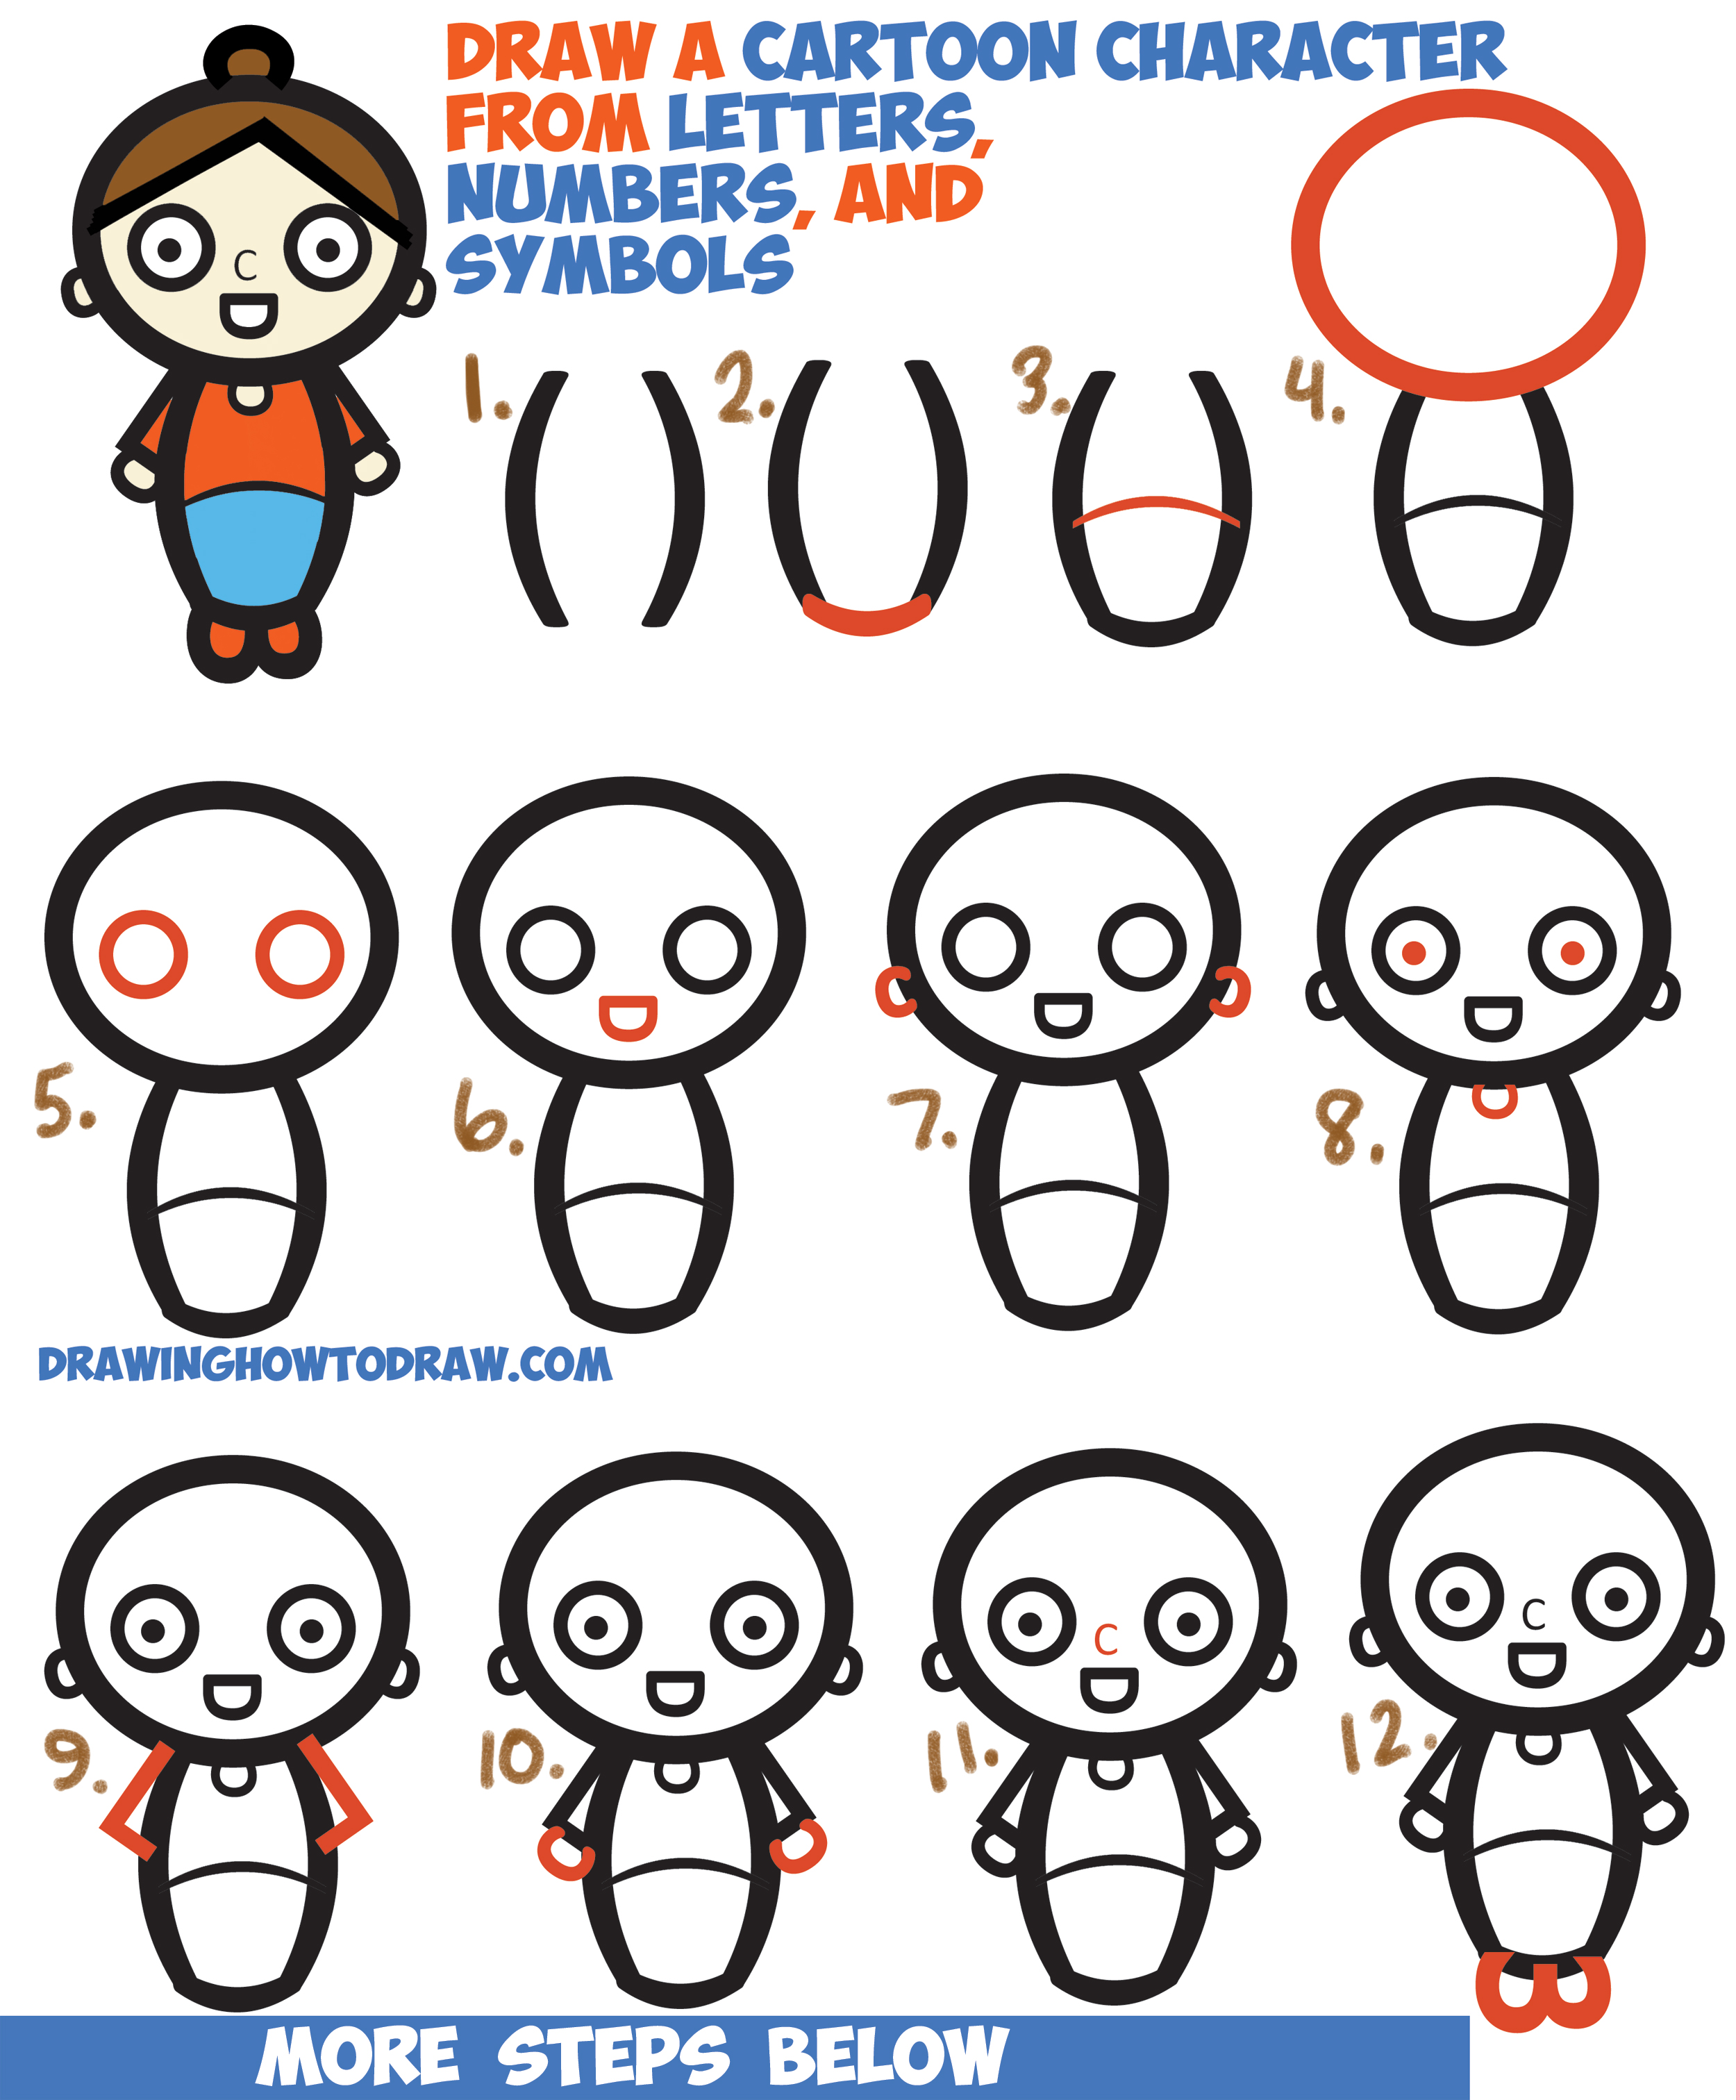 How To Draw A Cartoon Woman Character From Letters Numbers Symbols Easy Step By Step Drawing Tutorial For Kids How To Draw Step By Step Drawing Tutorials